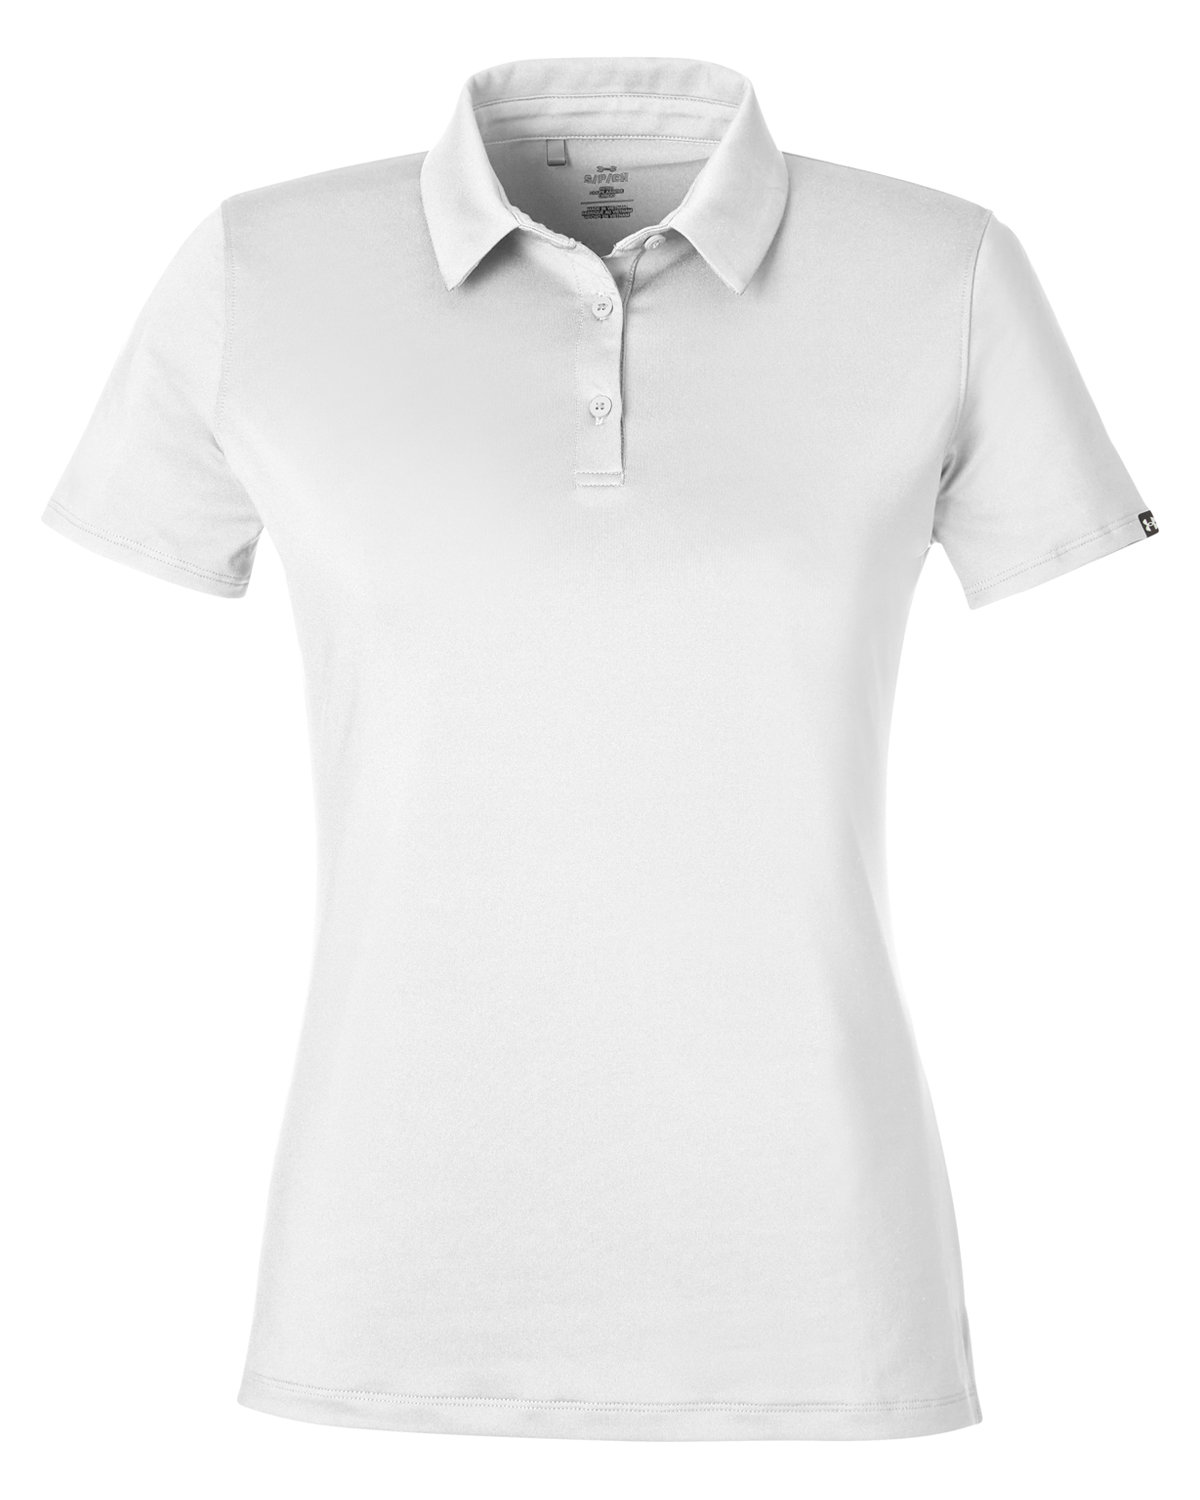 Under Armour 1385910 - Ladies' Recycled Polo